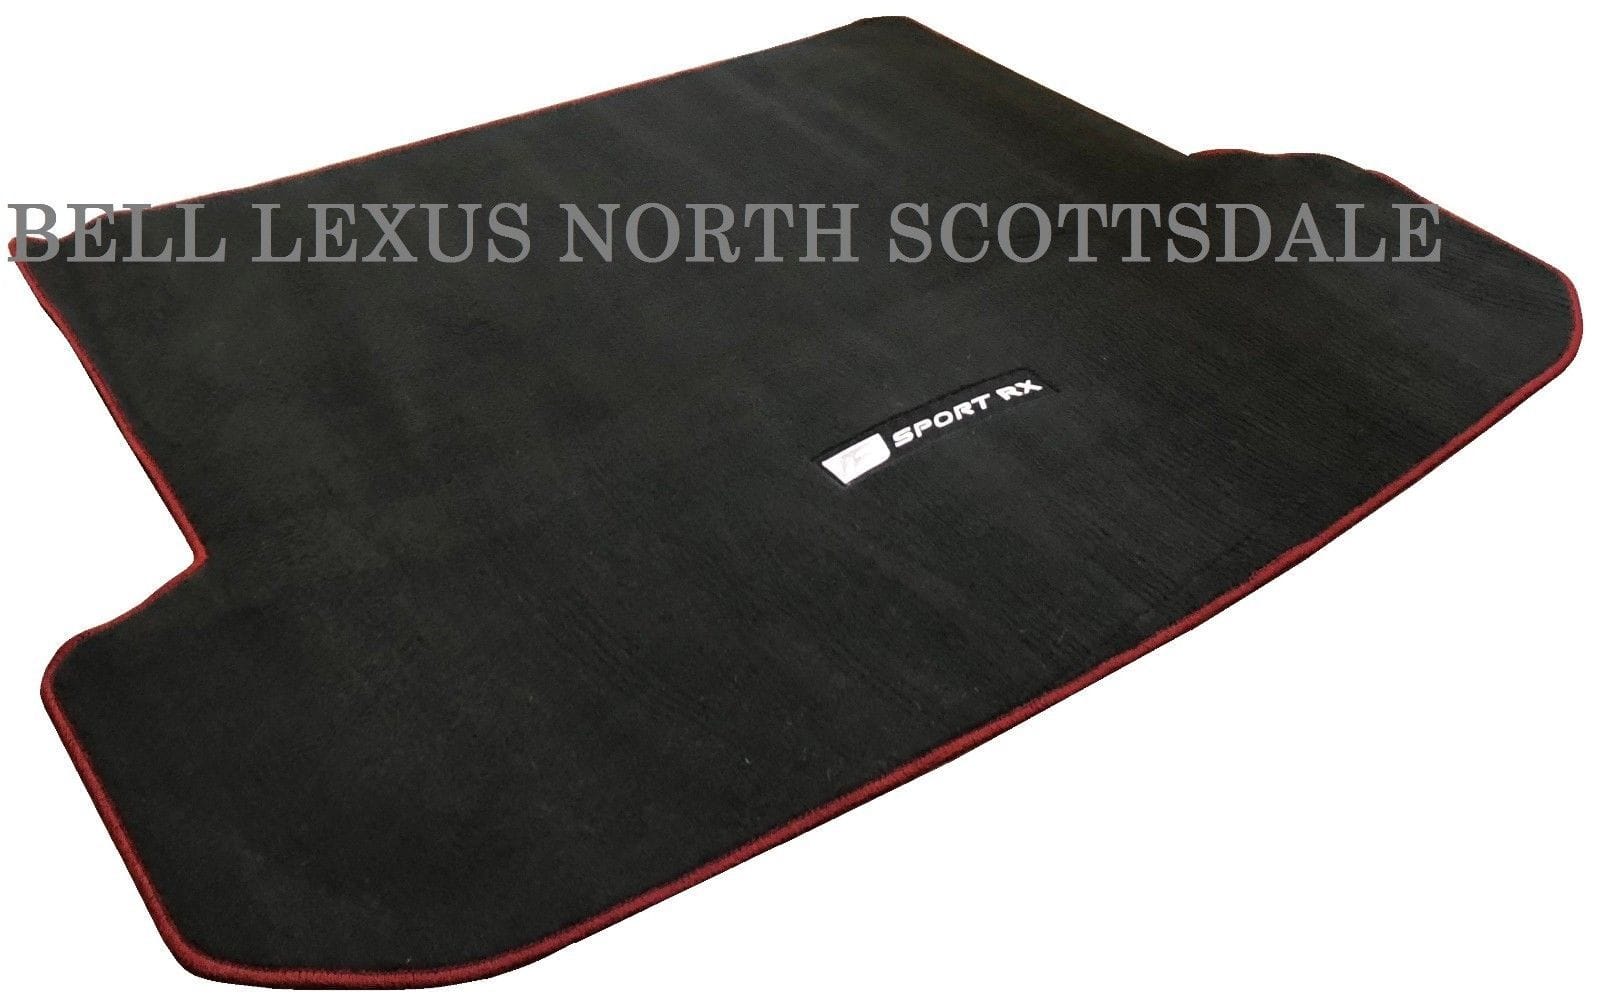 Interior/Upholstery - 2016-2019 Rioja Red FSPORT OEM Cargo Mat - Used - 2016 to 2019 Lexus RX350 - San Gabriel, CA 91776, United States